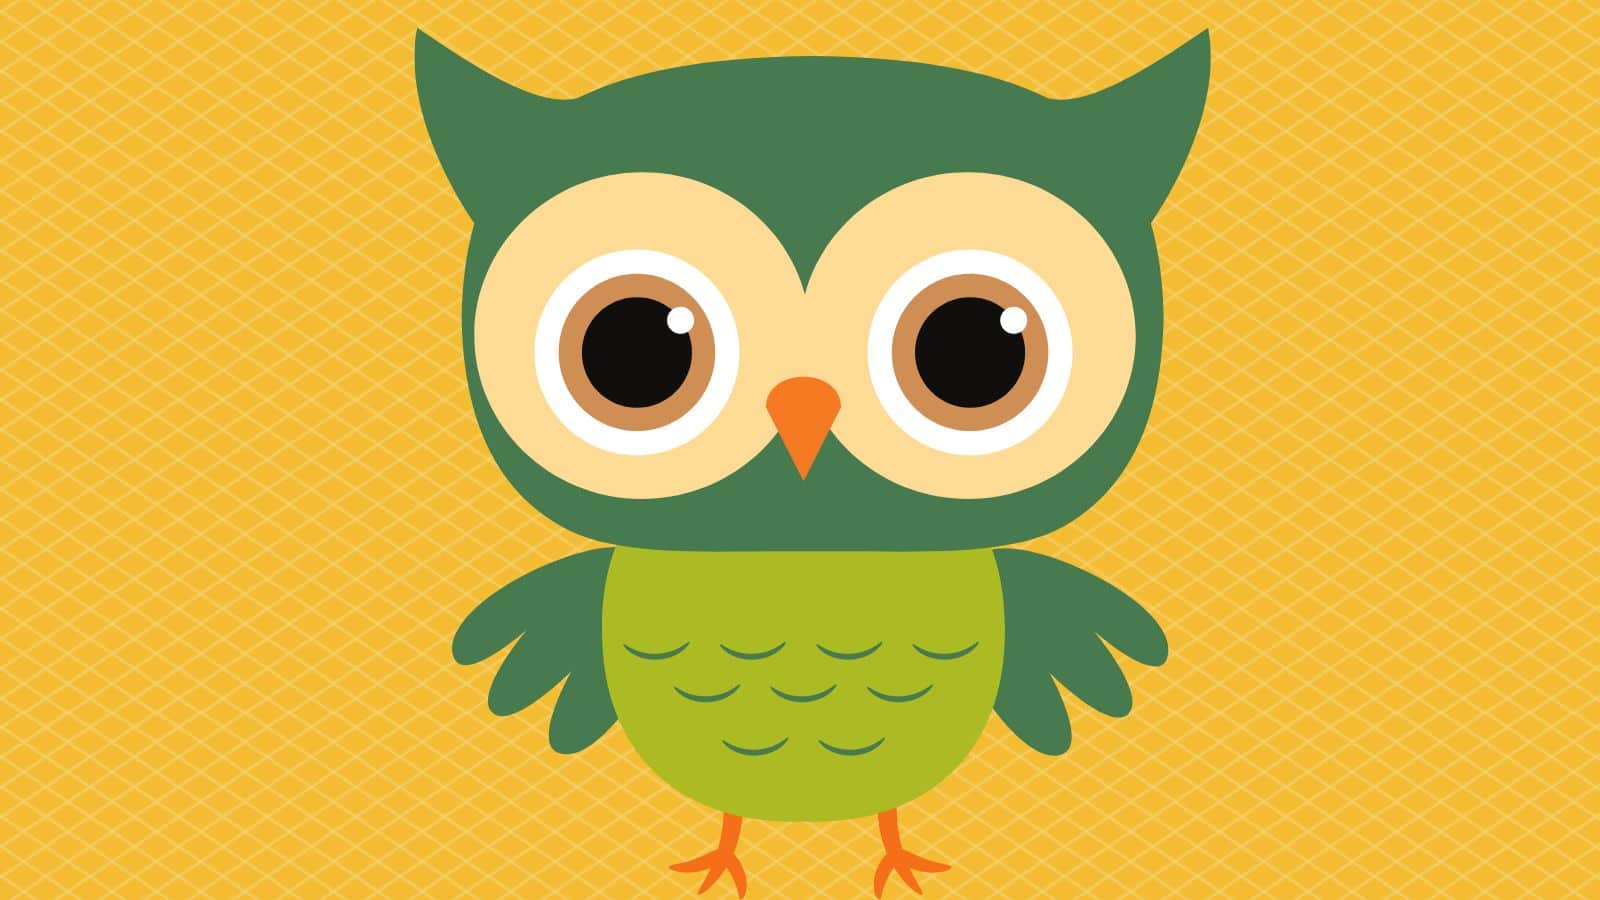 Find Your Little Green Owl: Focus vs. Productivity